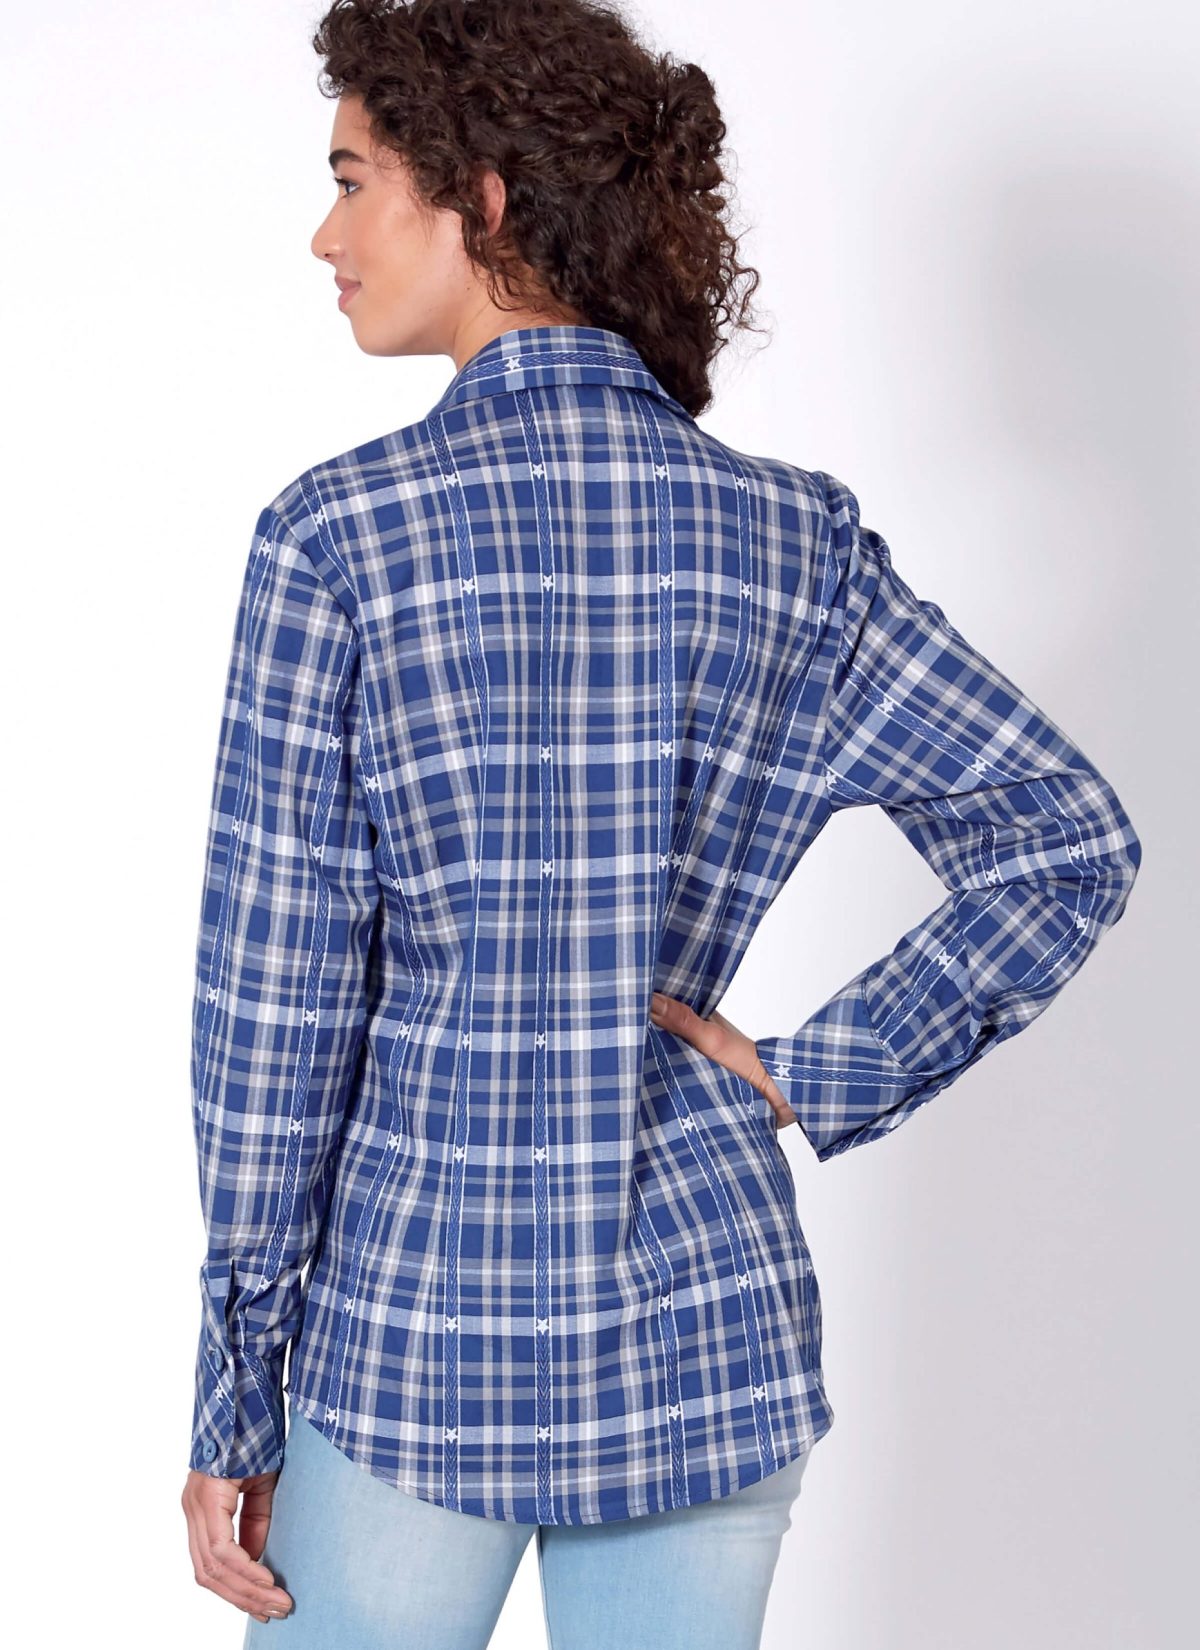 McCall's Sewing Pattern M7980 Misses' and Men's Shirts